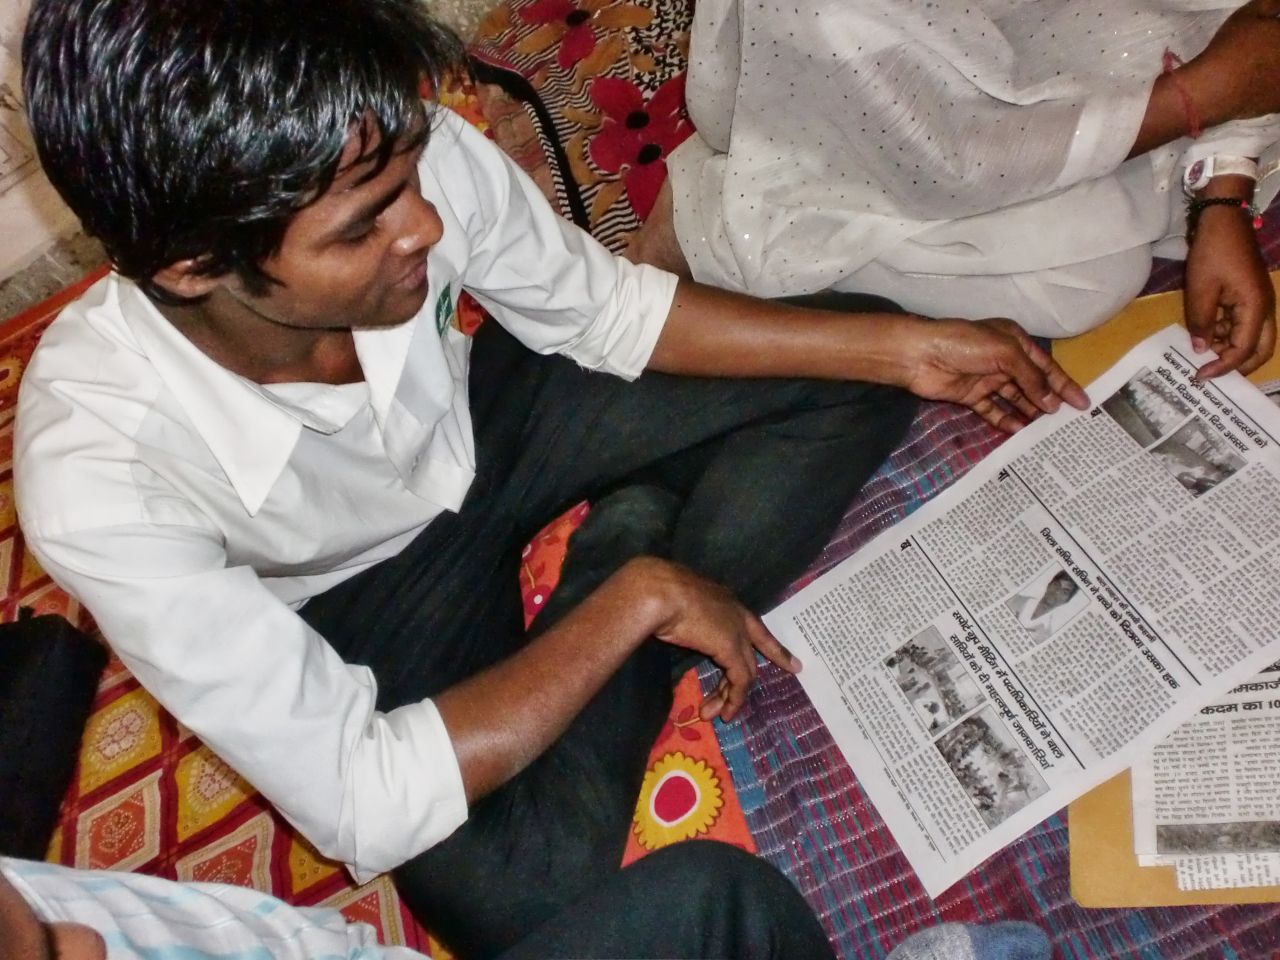 The newspaper helps to document life for the kids on the streets of the Indian capital's slums.